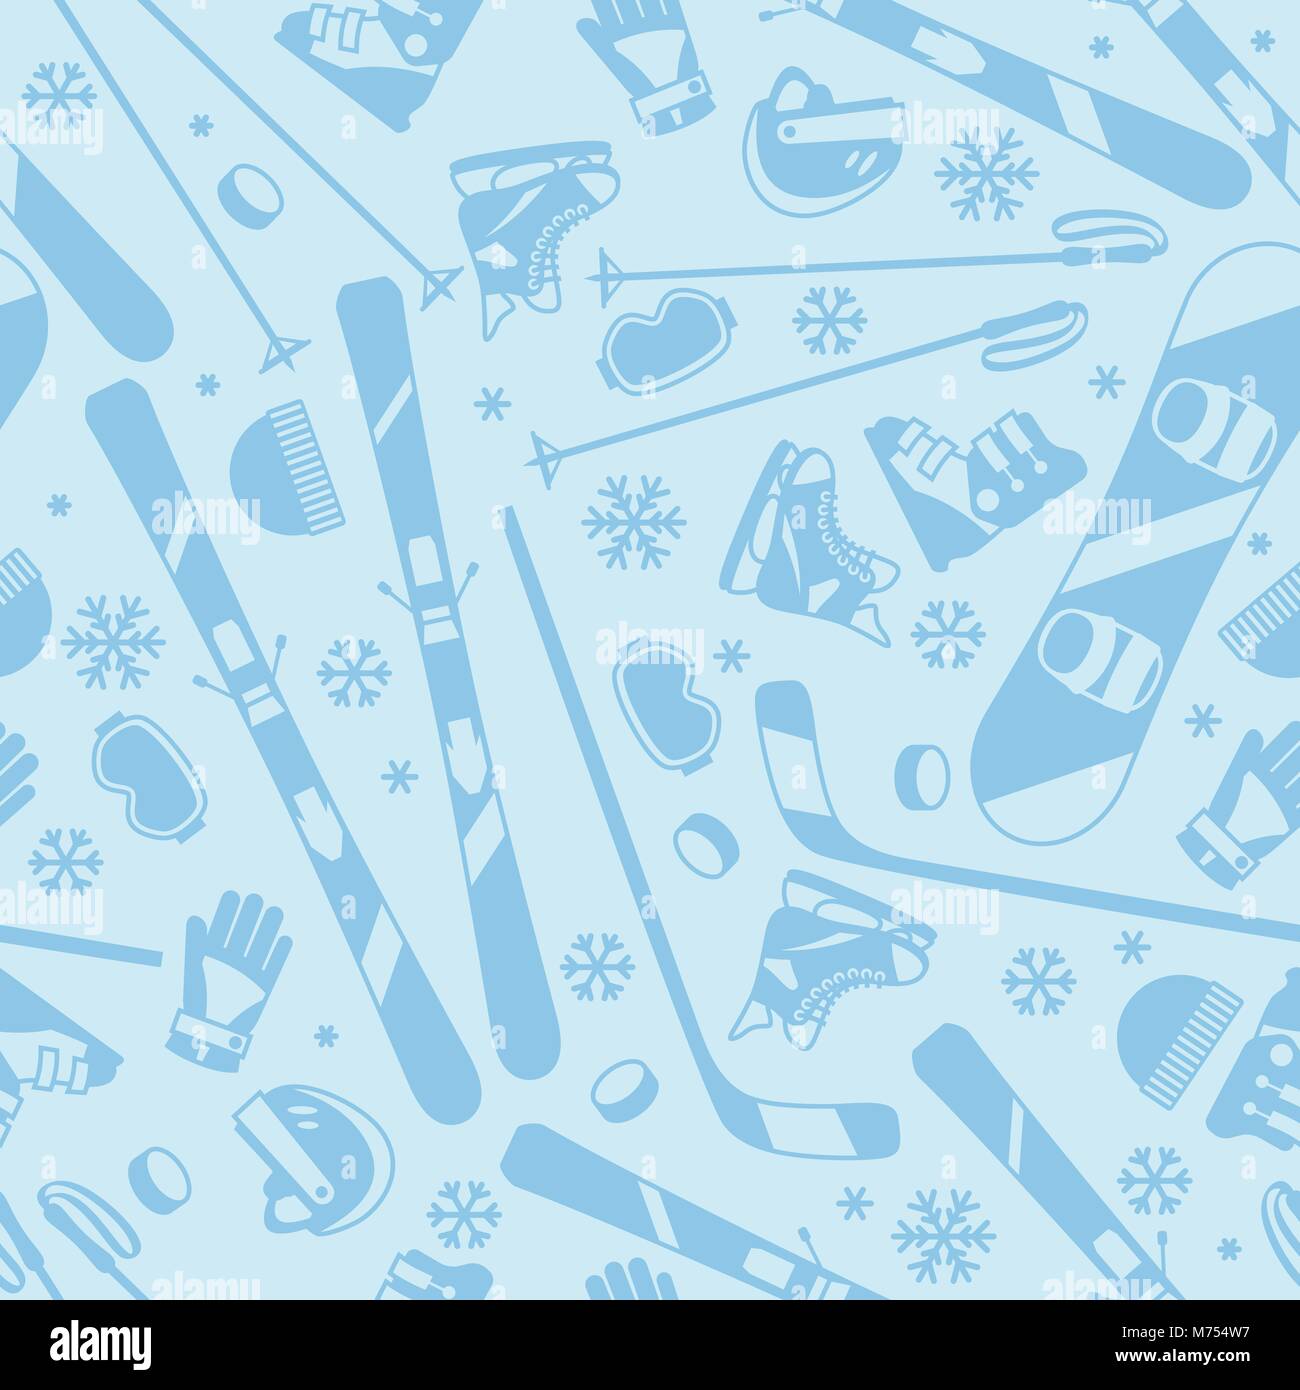 Winter sports seamless pattern with equipment flat icons Stock Vector